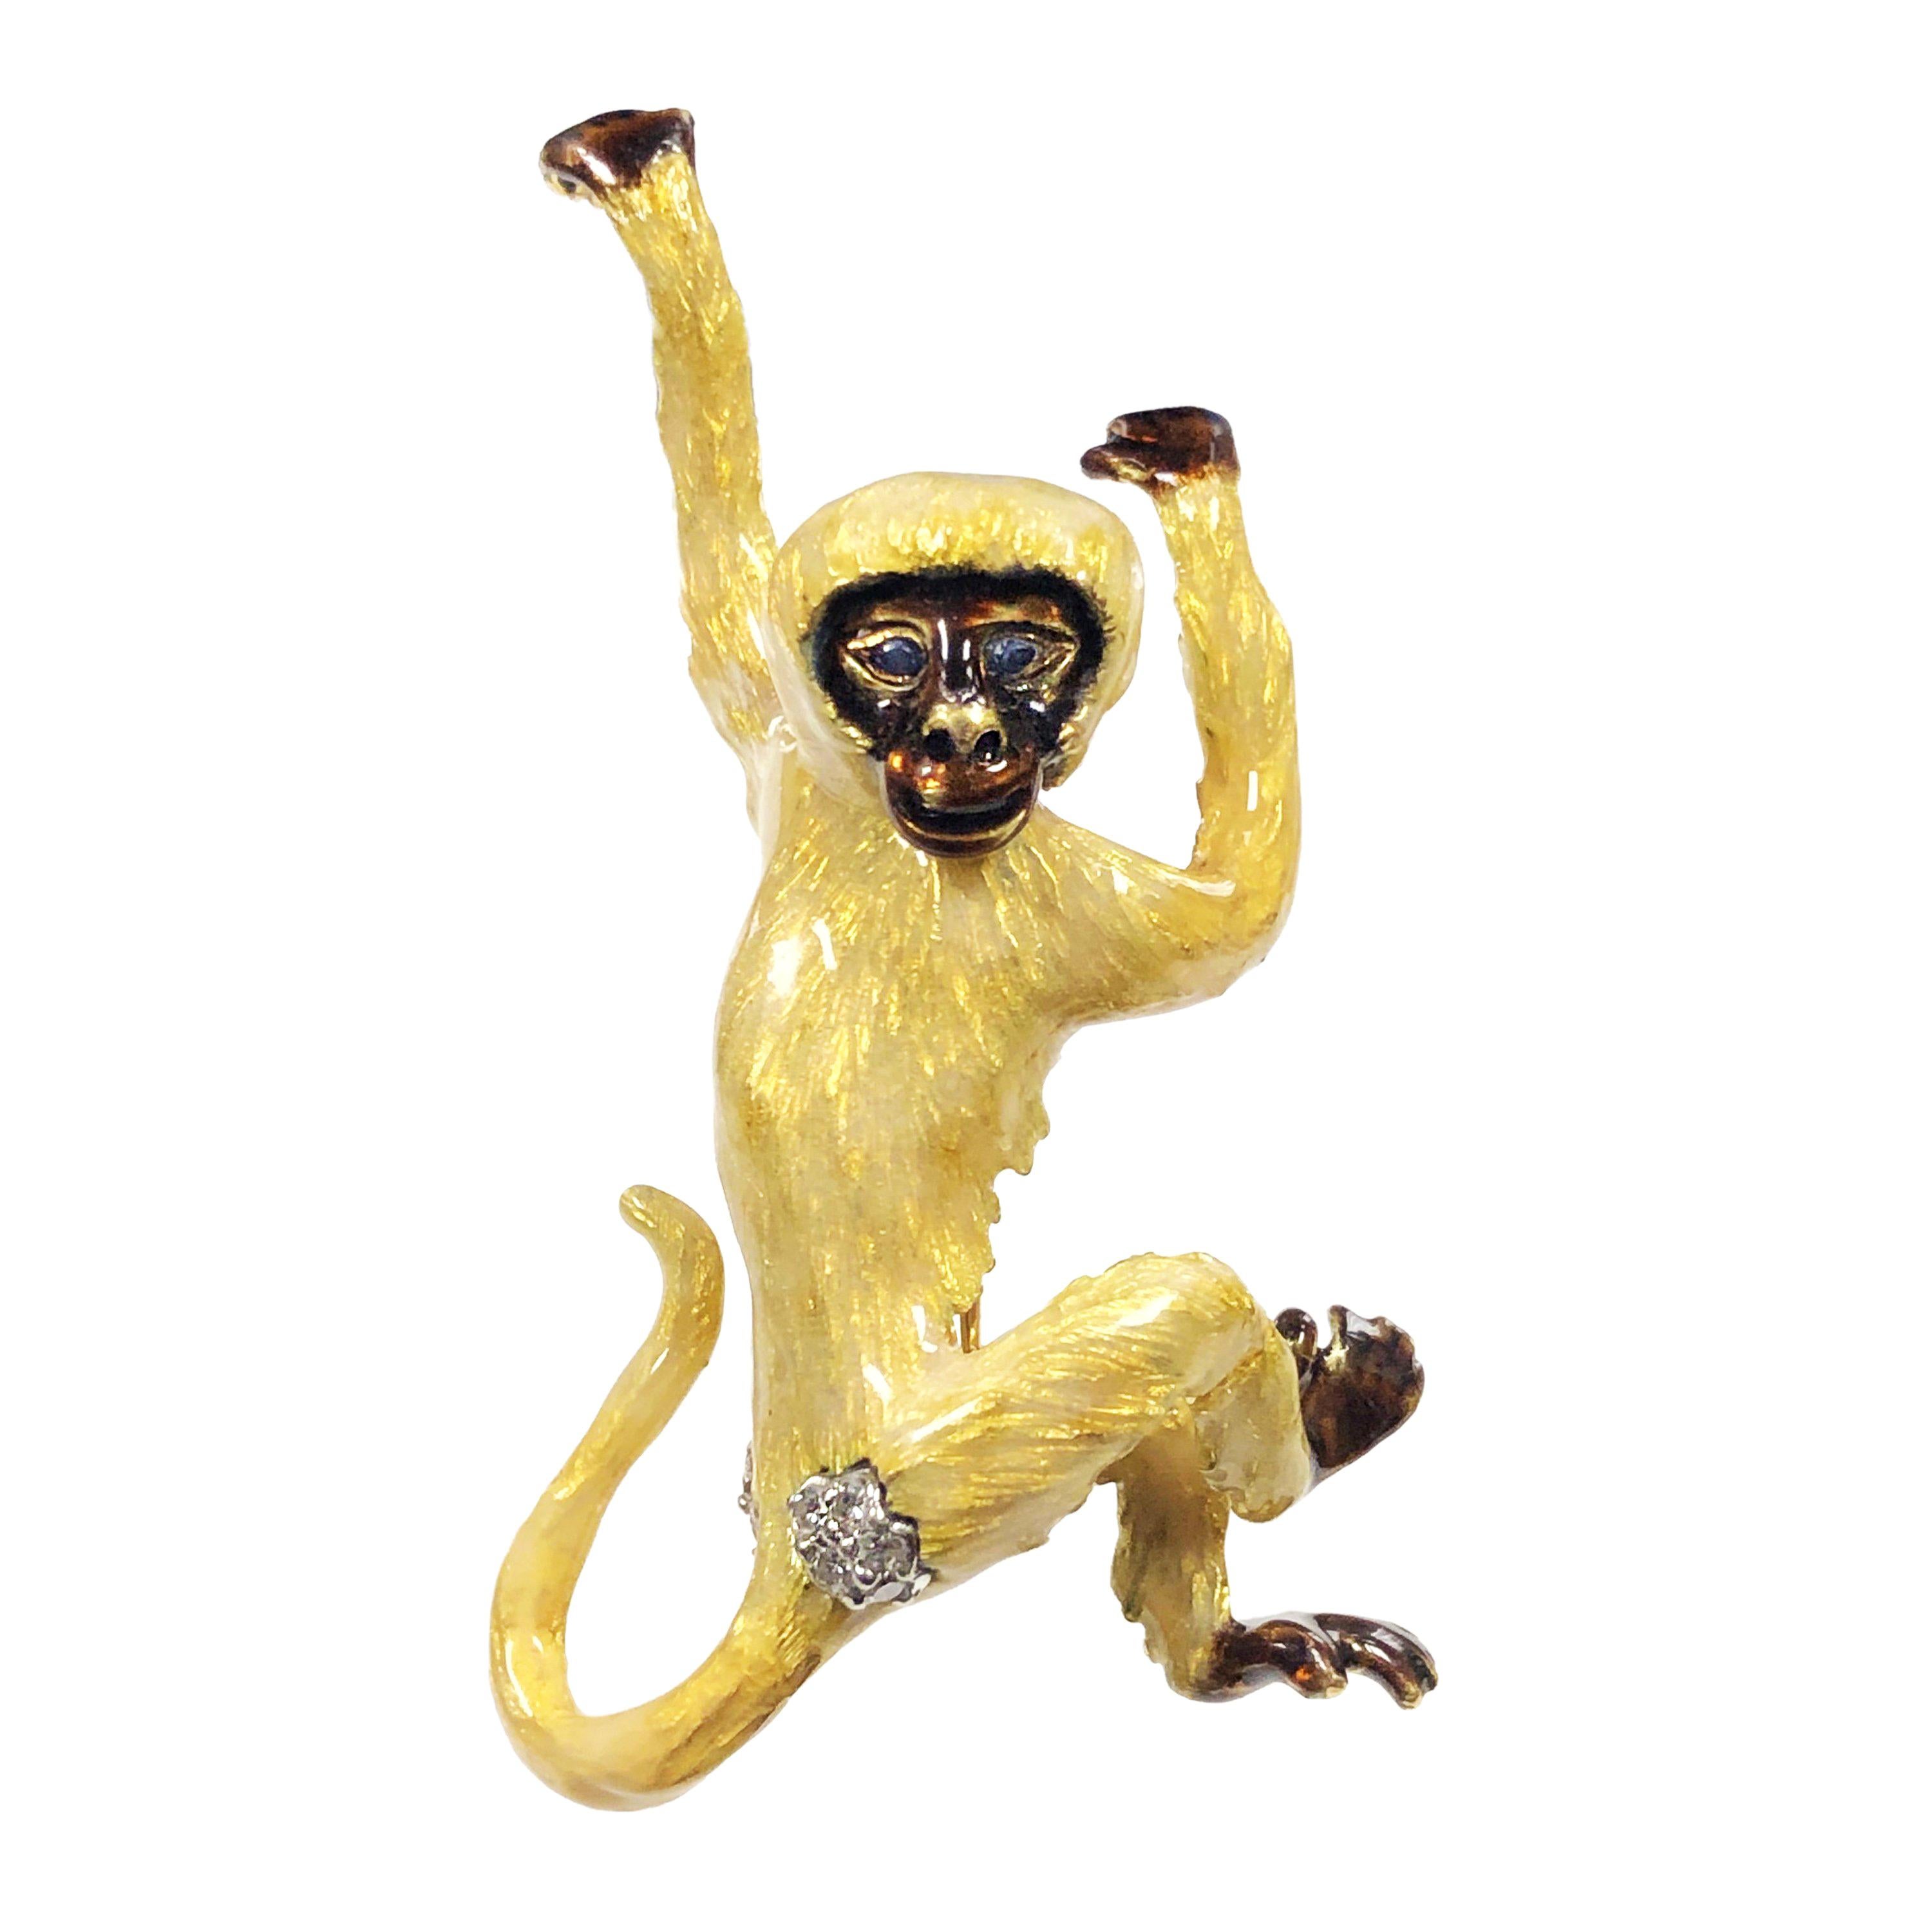 Tiffany & Co. Whimsical Yellow Gold Enamel and Gem Set Monkey Brooch For Sale